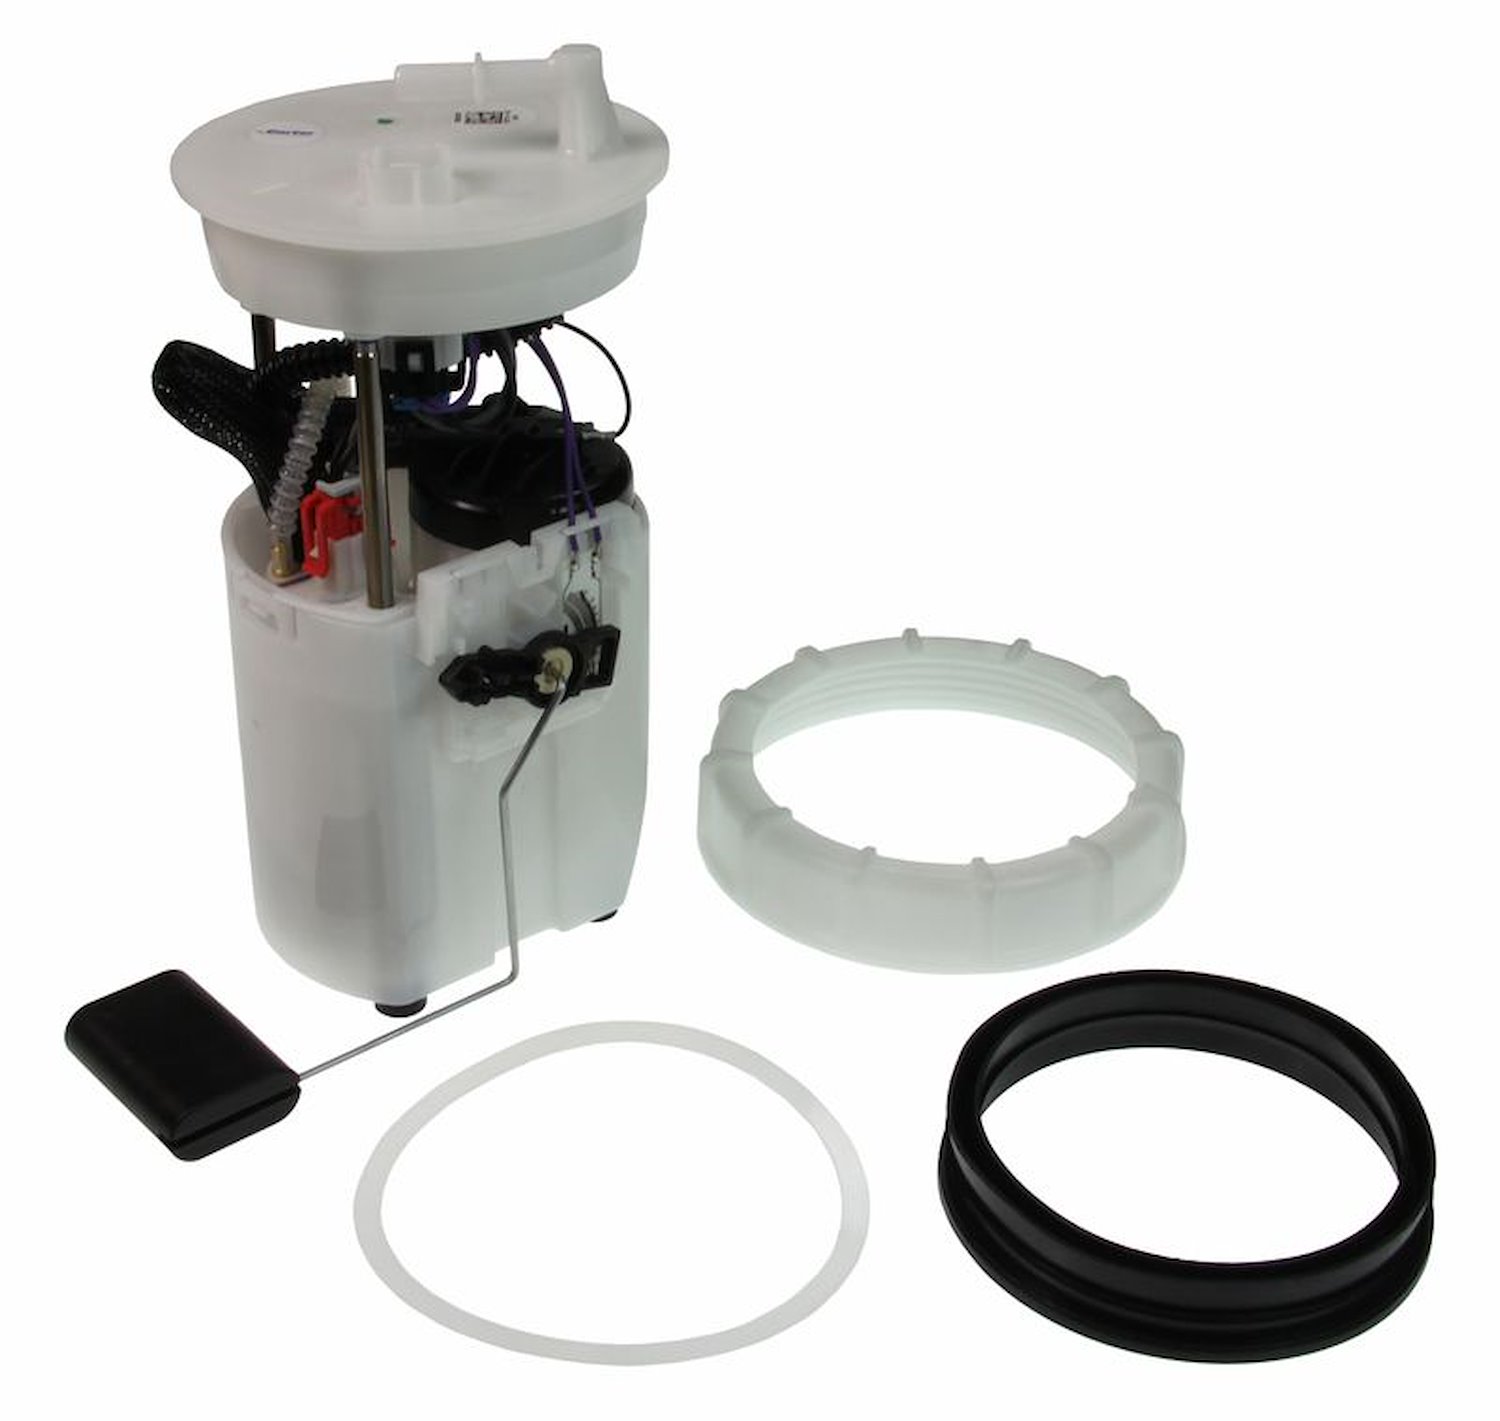 OE Replacement Fuel Pump Module Assembly for 2008-2012 Honda Accord